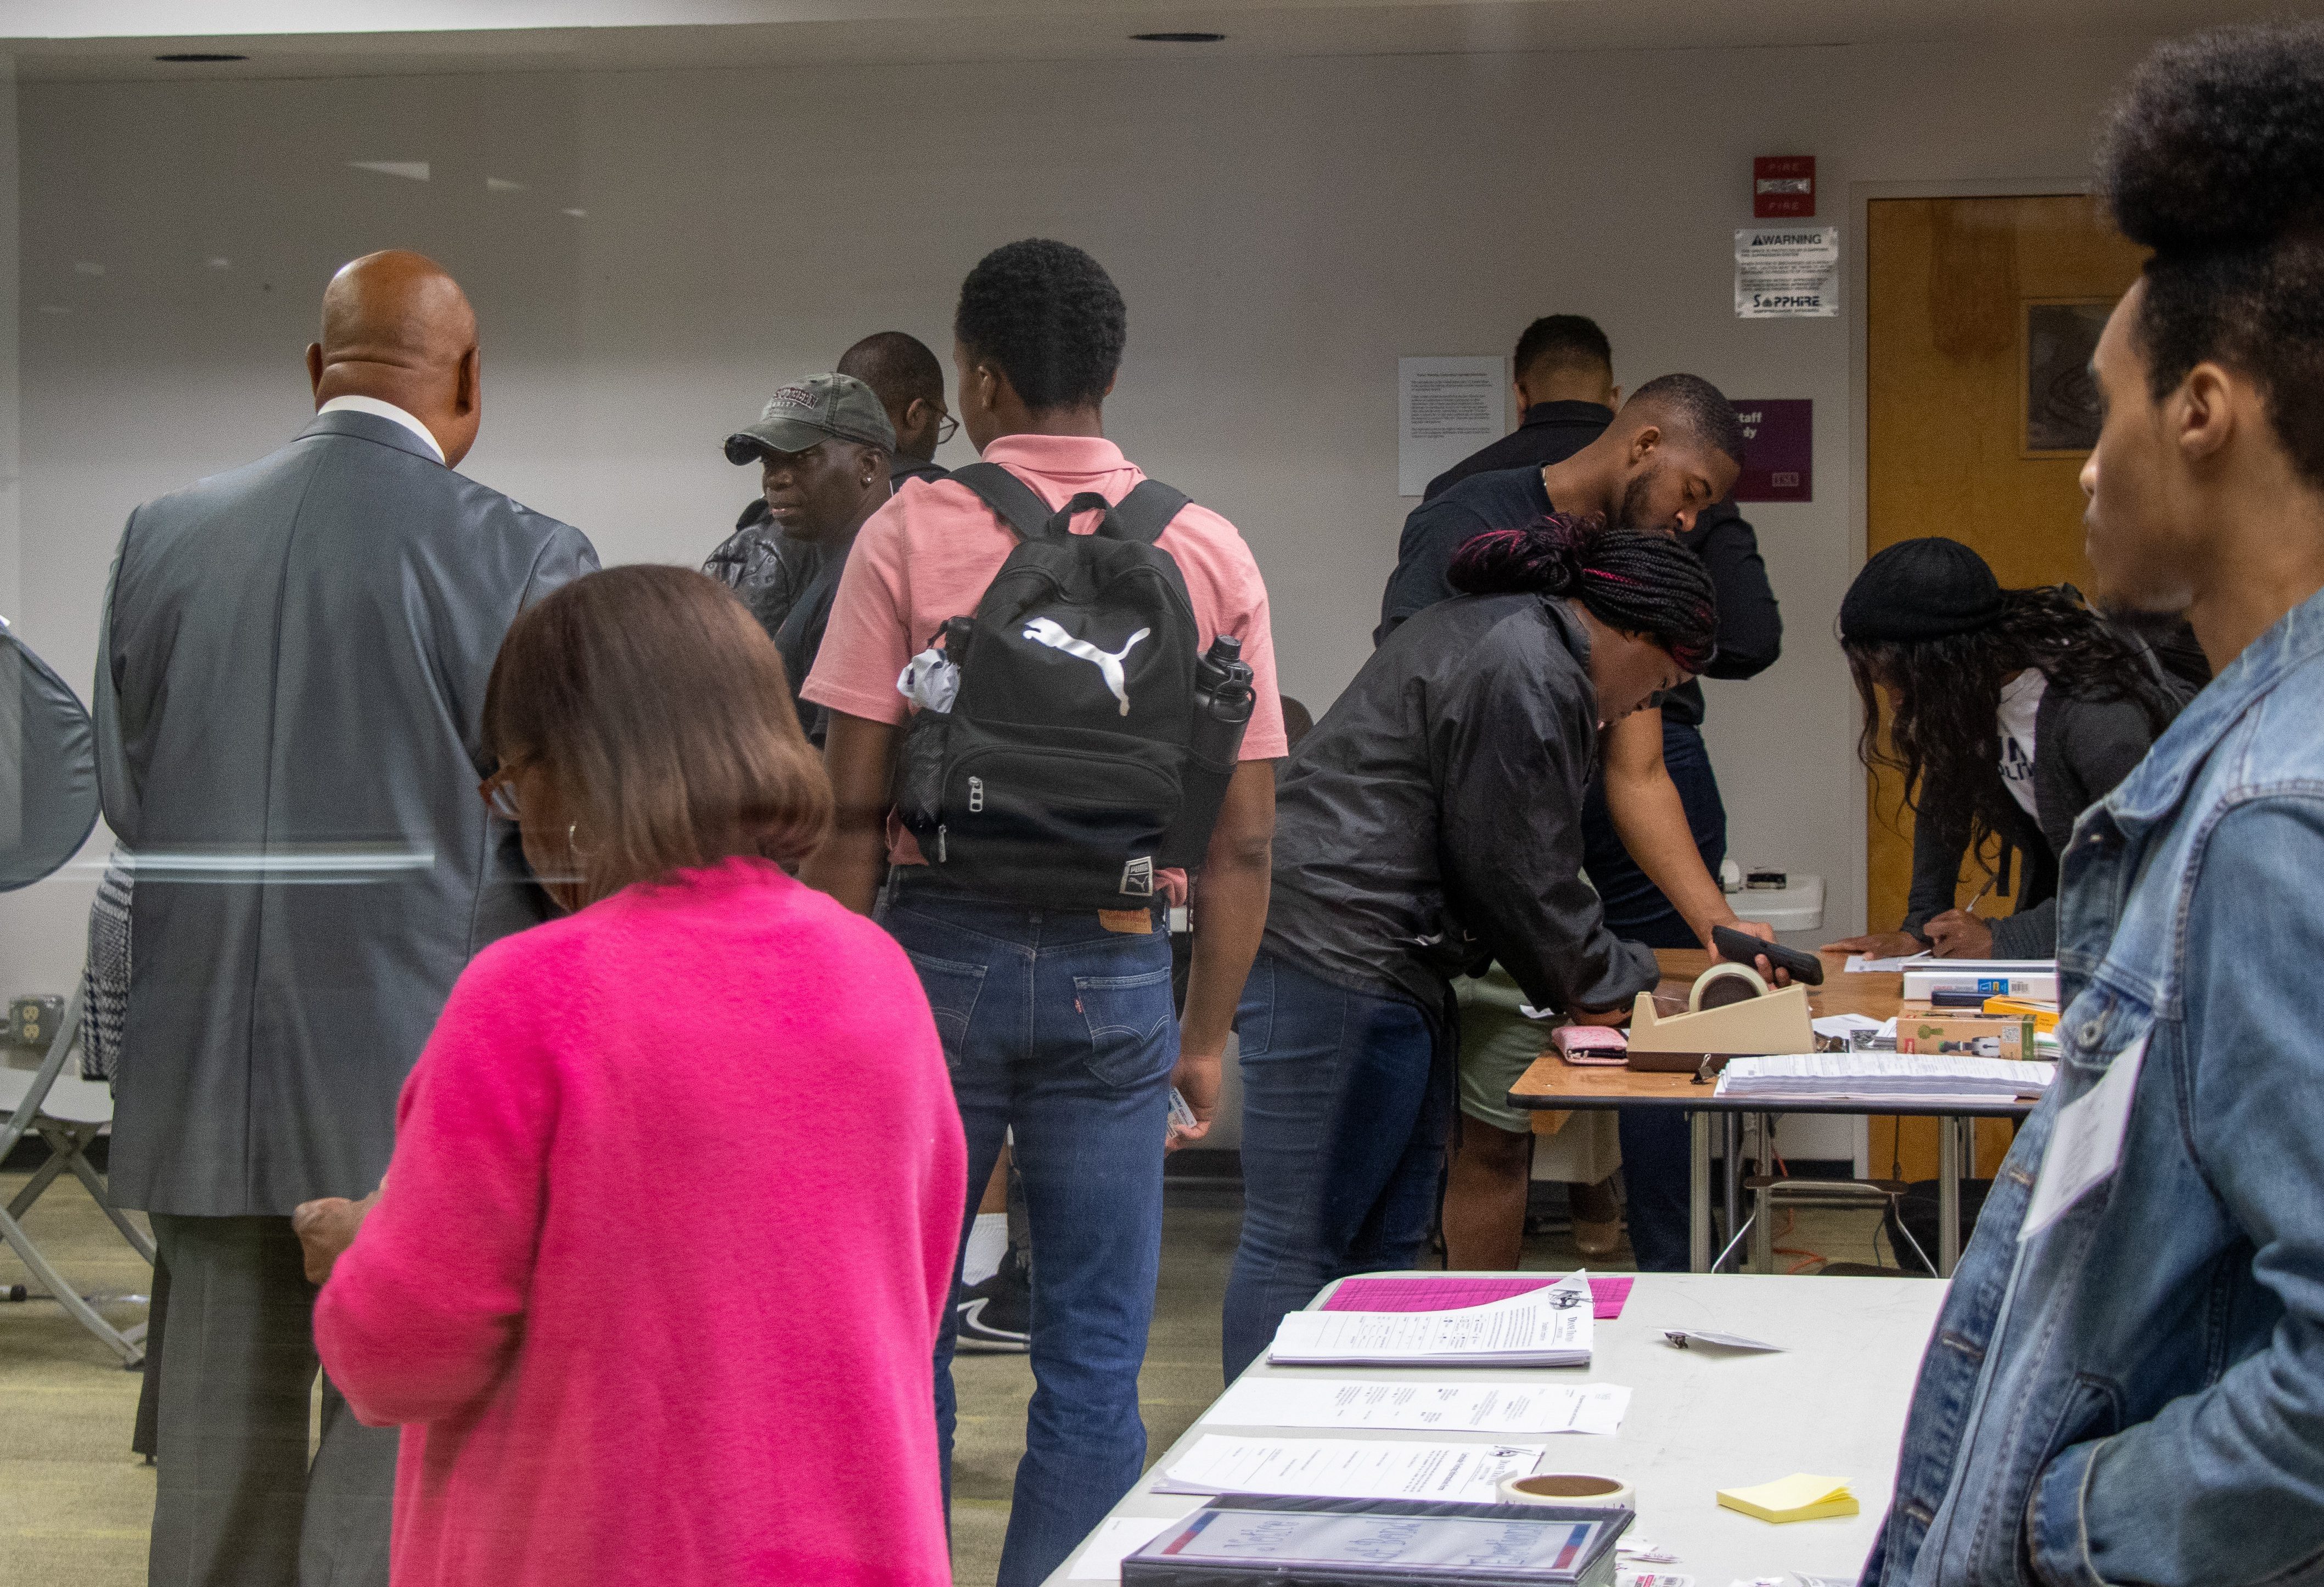 Early voters inside the library at Texas Southern University.